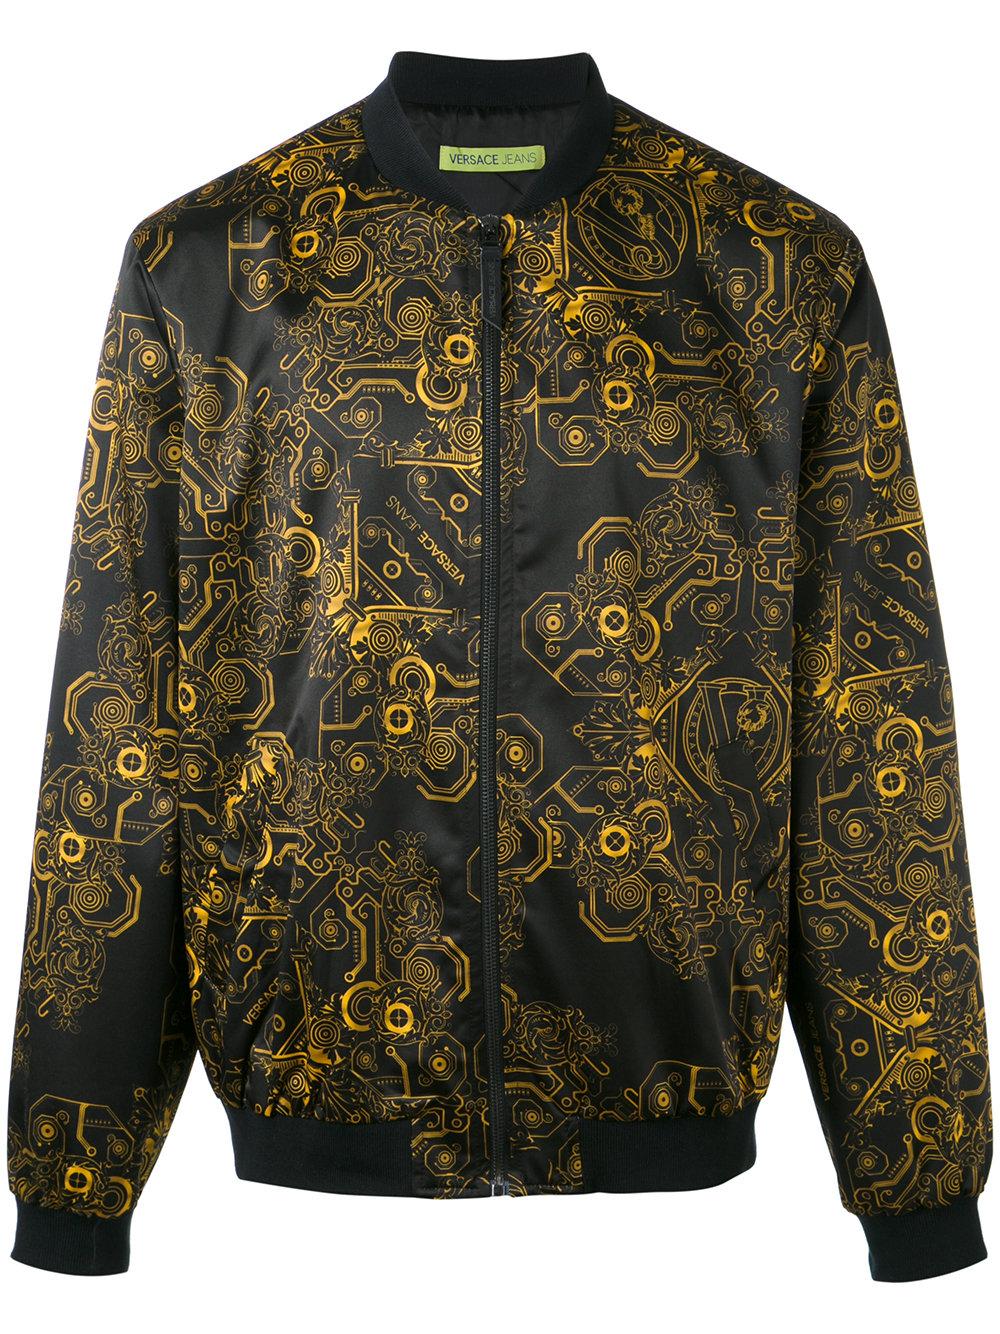 Lyst - Versace Jeans Duchesse Techno Baroque Print Bomber Jacket in ...